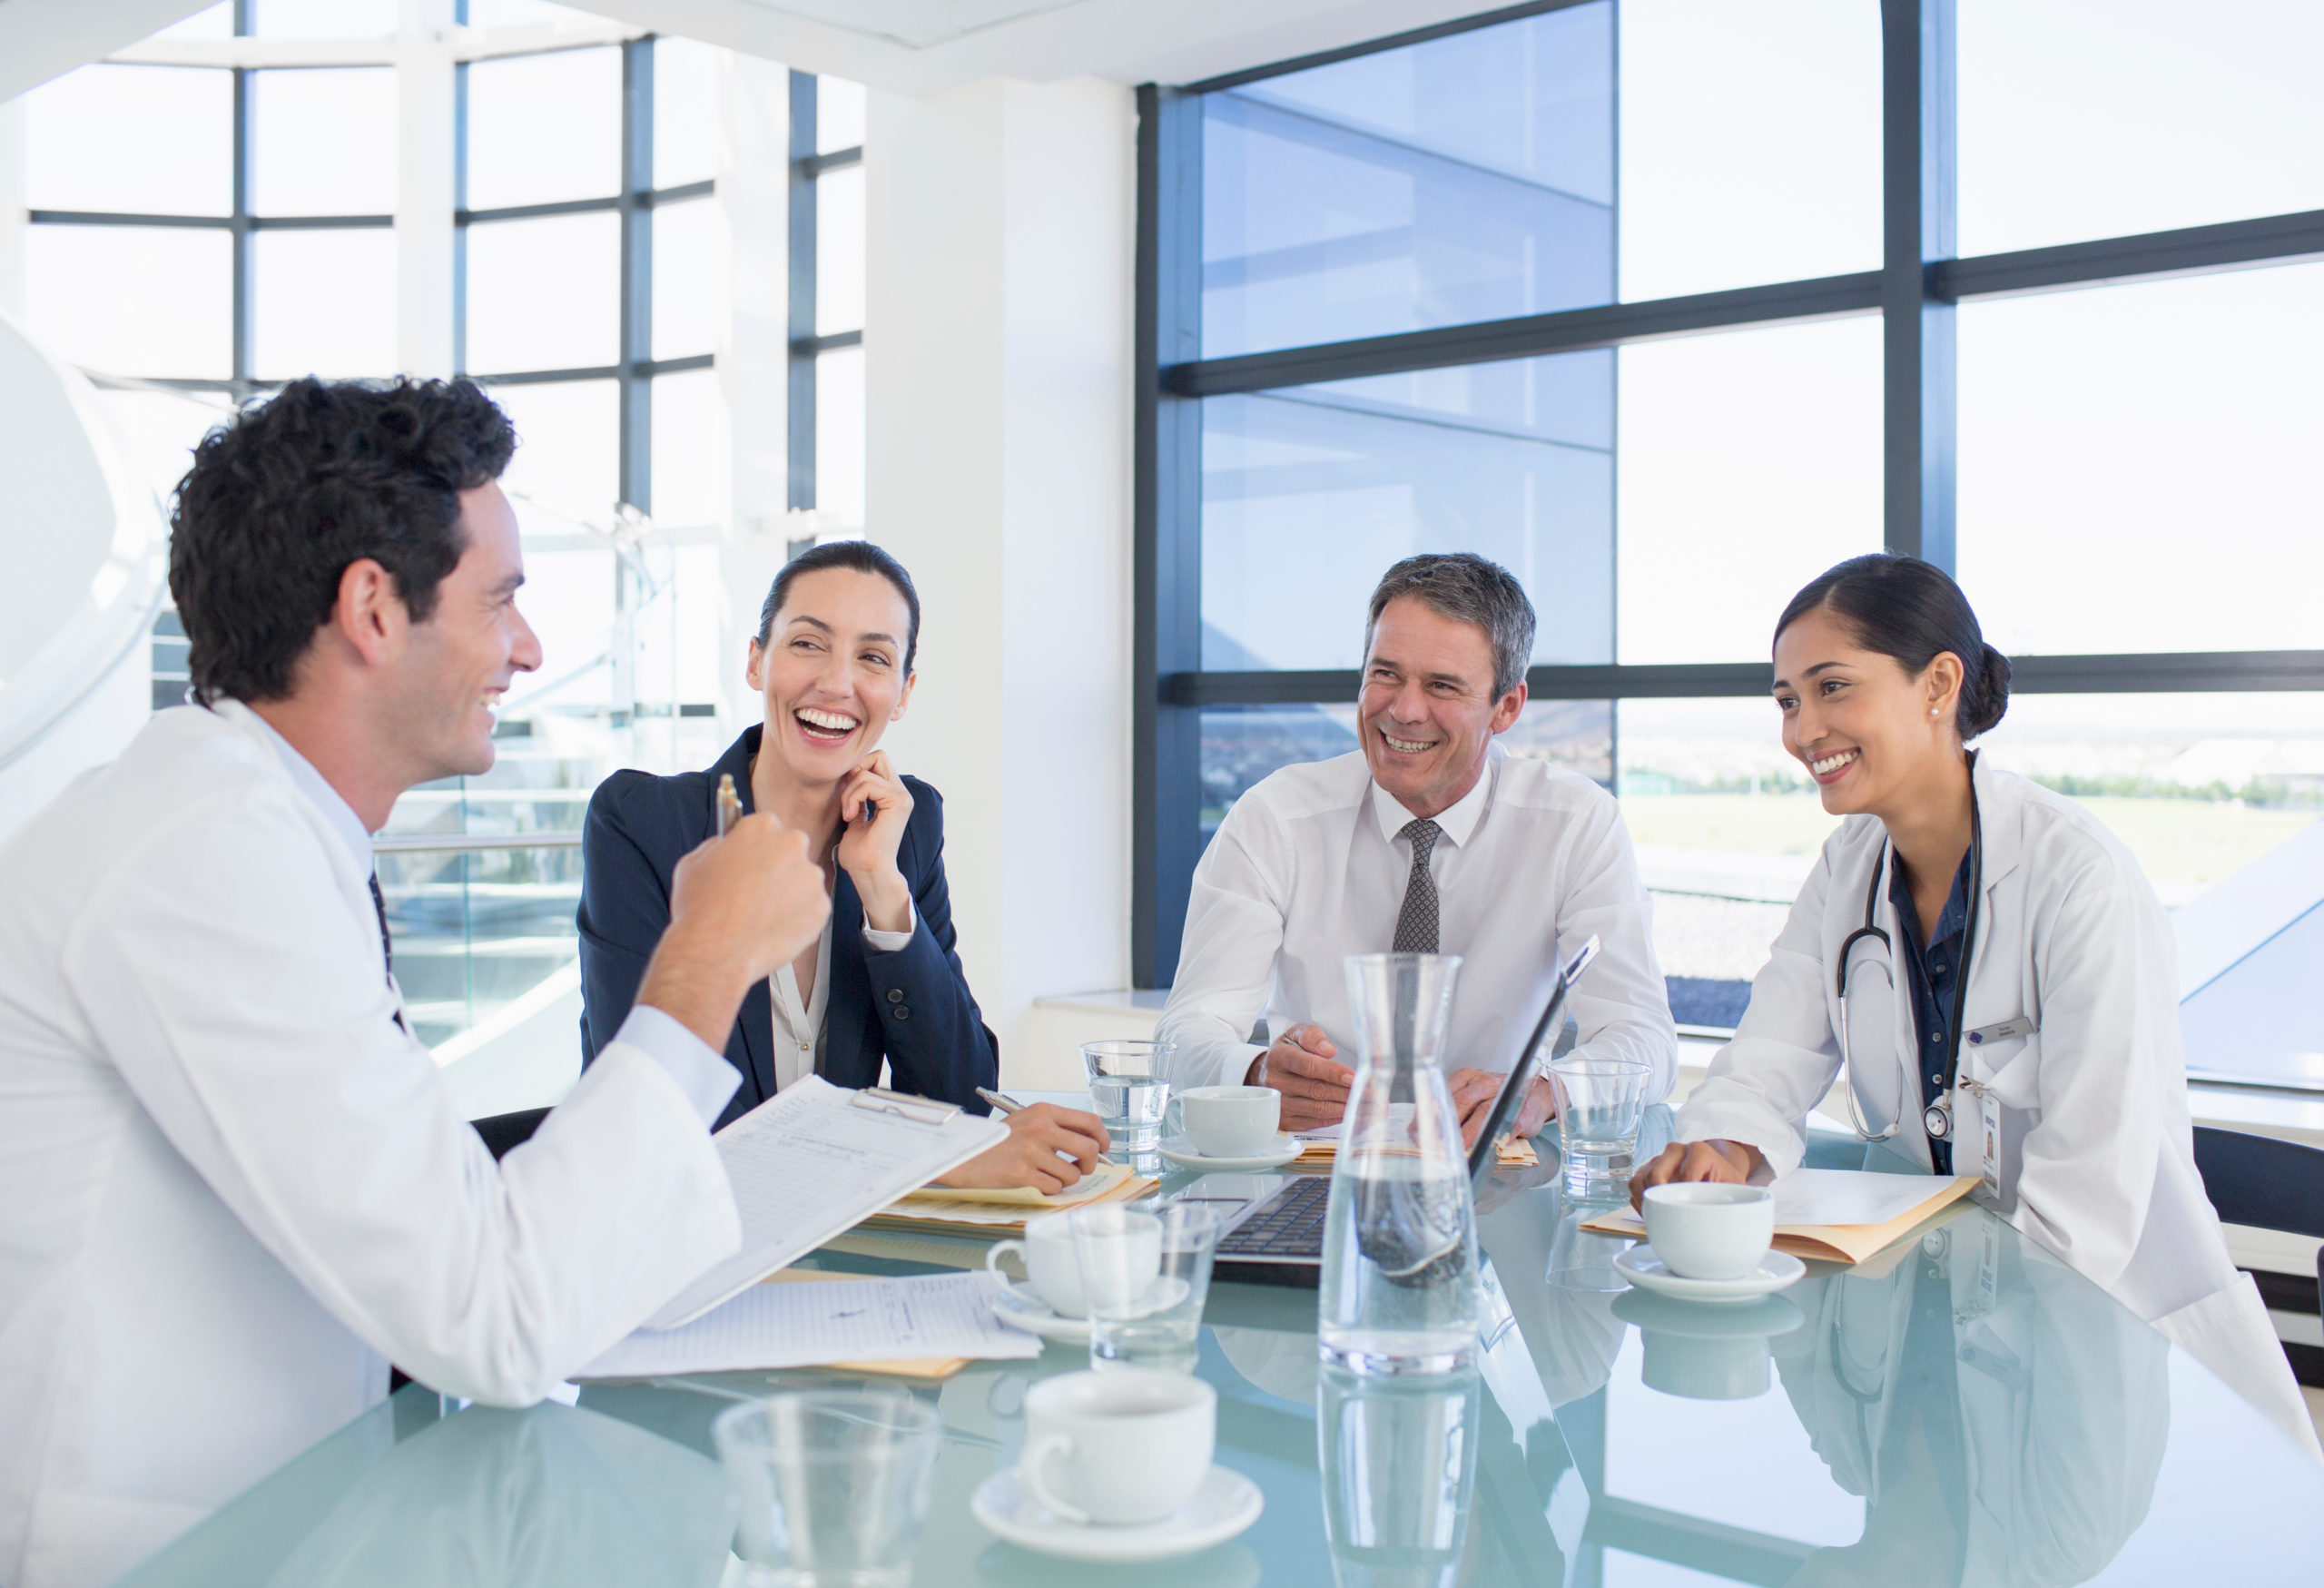 Doctors and business people talking in meeting